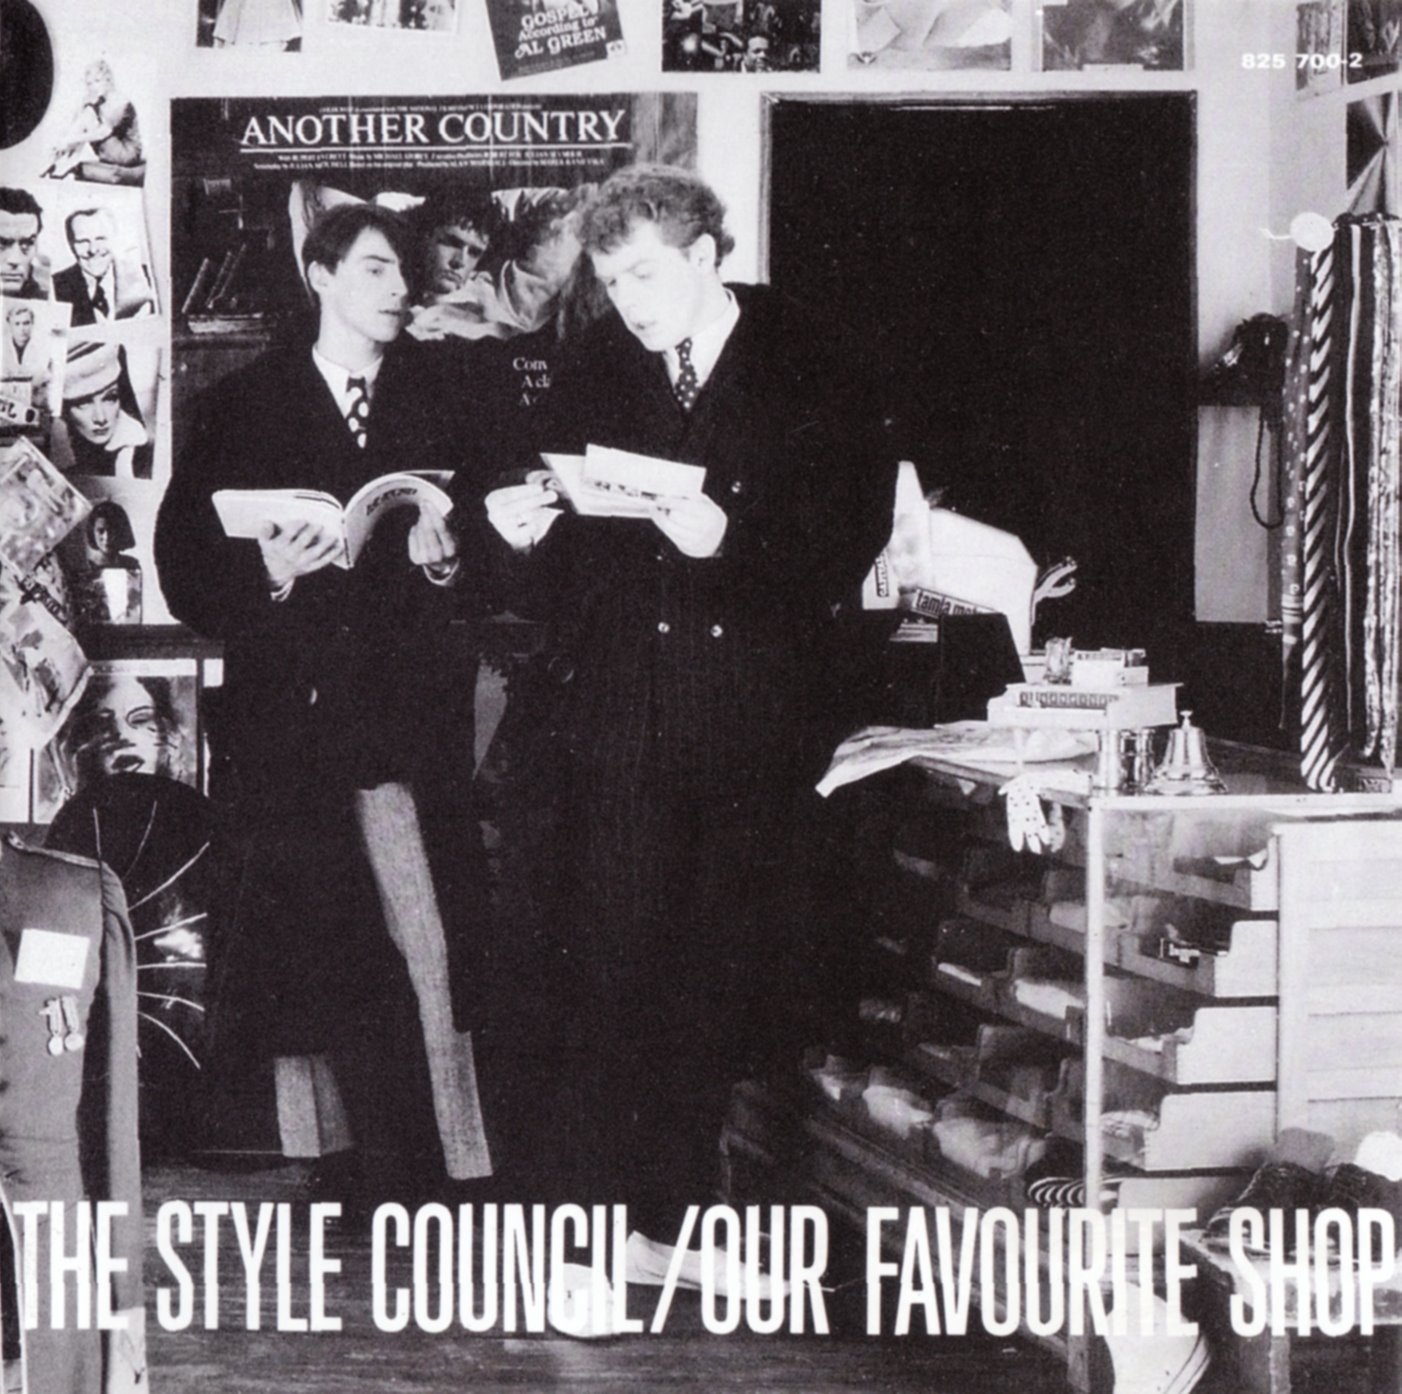 THE STYLE COUNCIL OUR FAVOURITE SHOP F